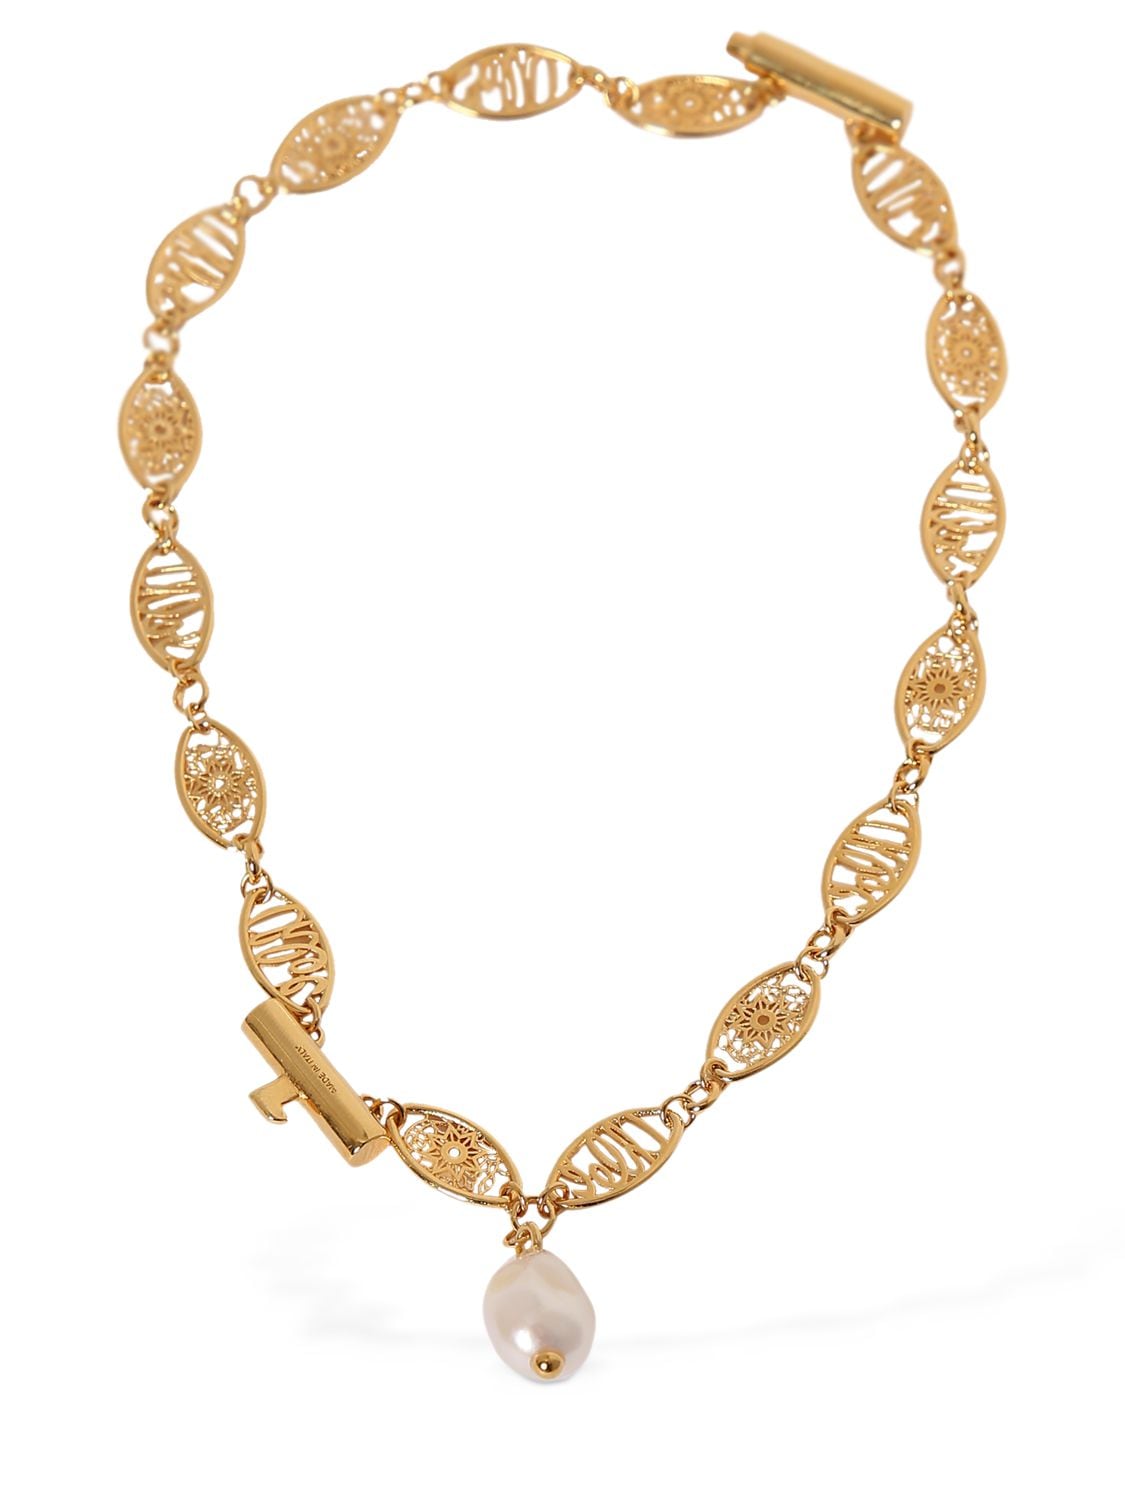 Chloé Darcey Lace Chain Bracelet In Gold,white